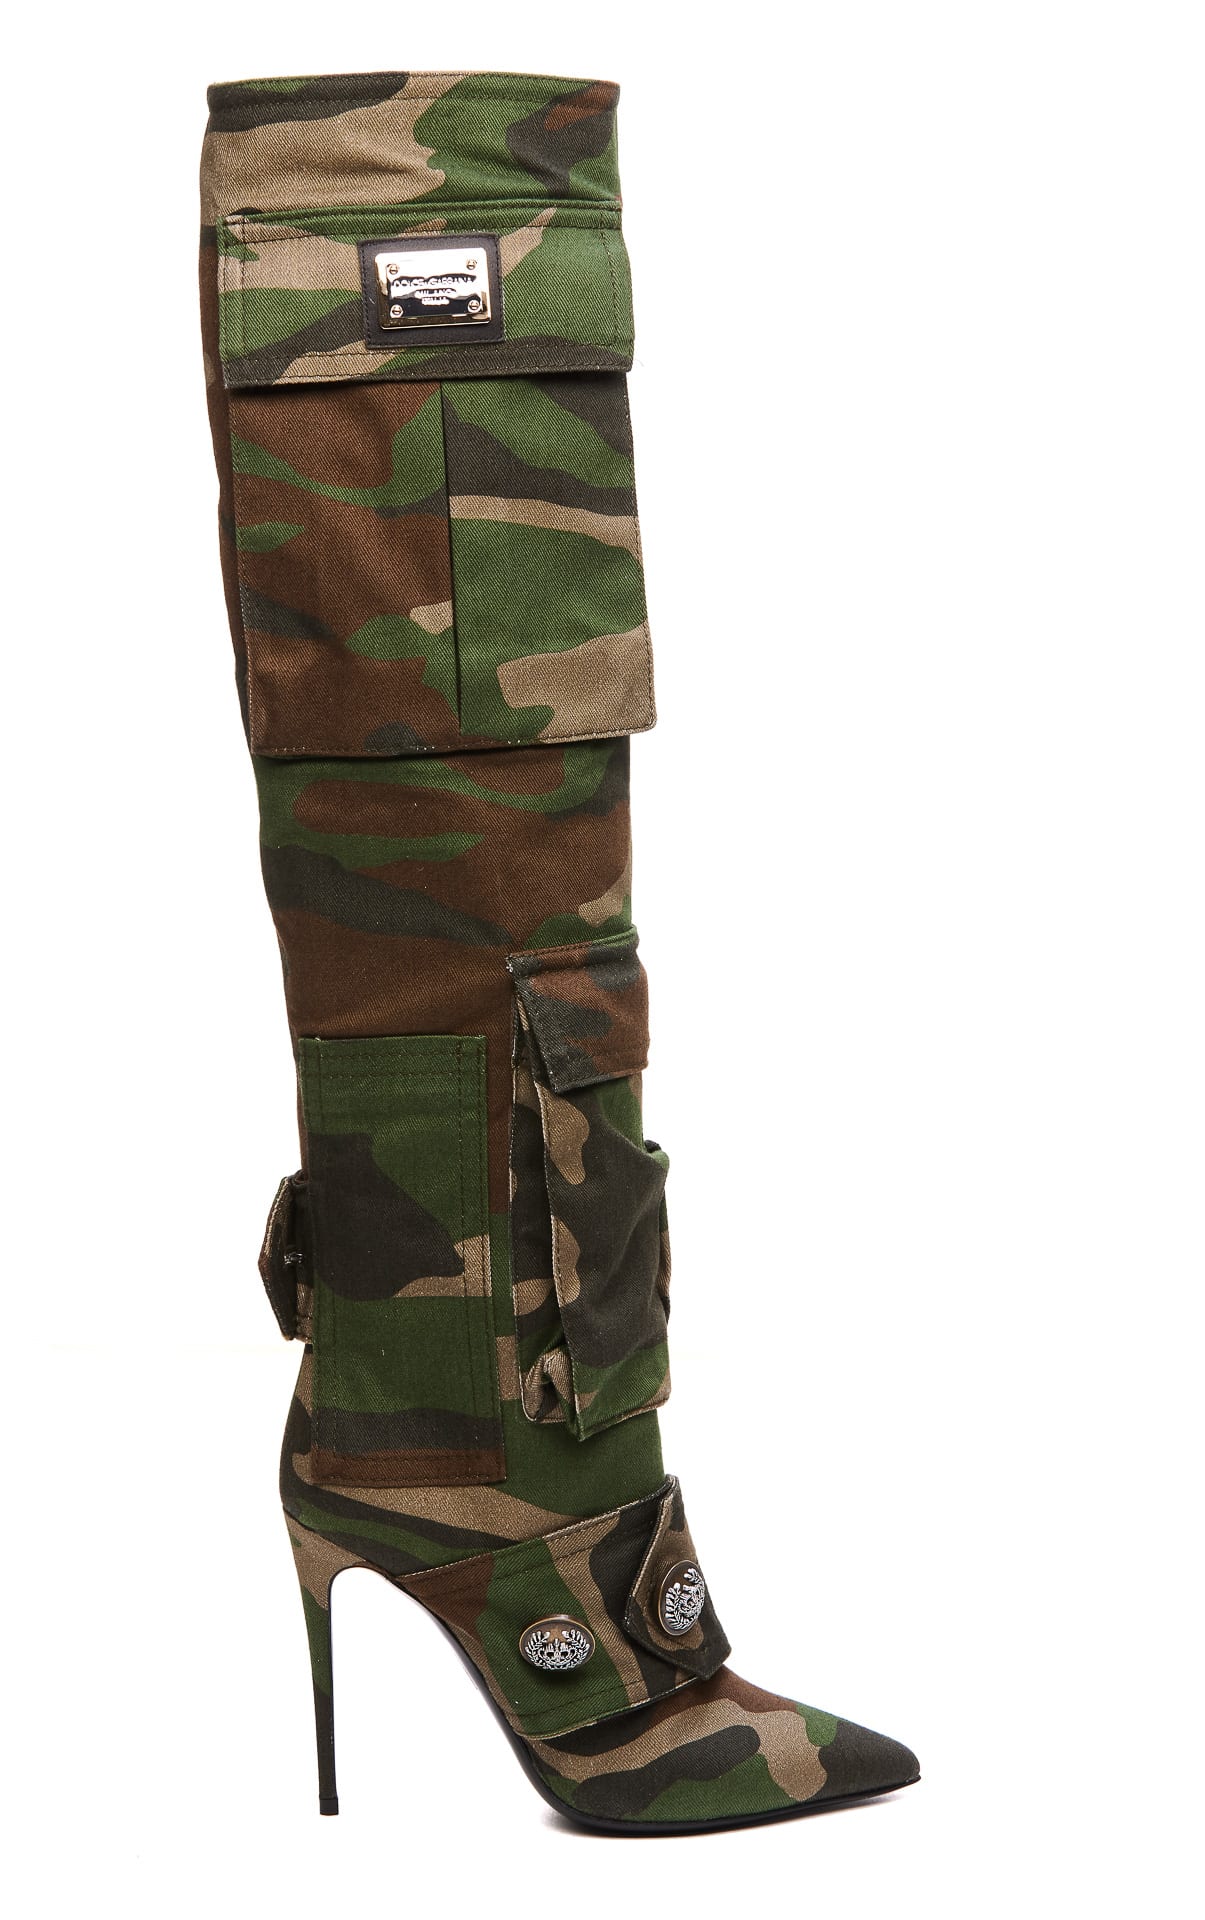 Dolce & Gabbana Patchwork Camouflage Boots